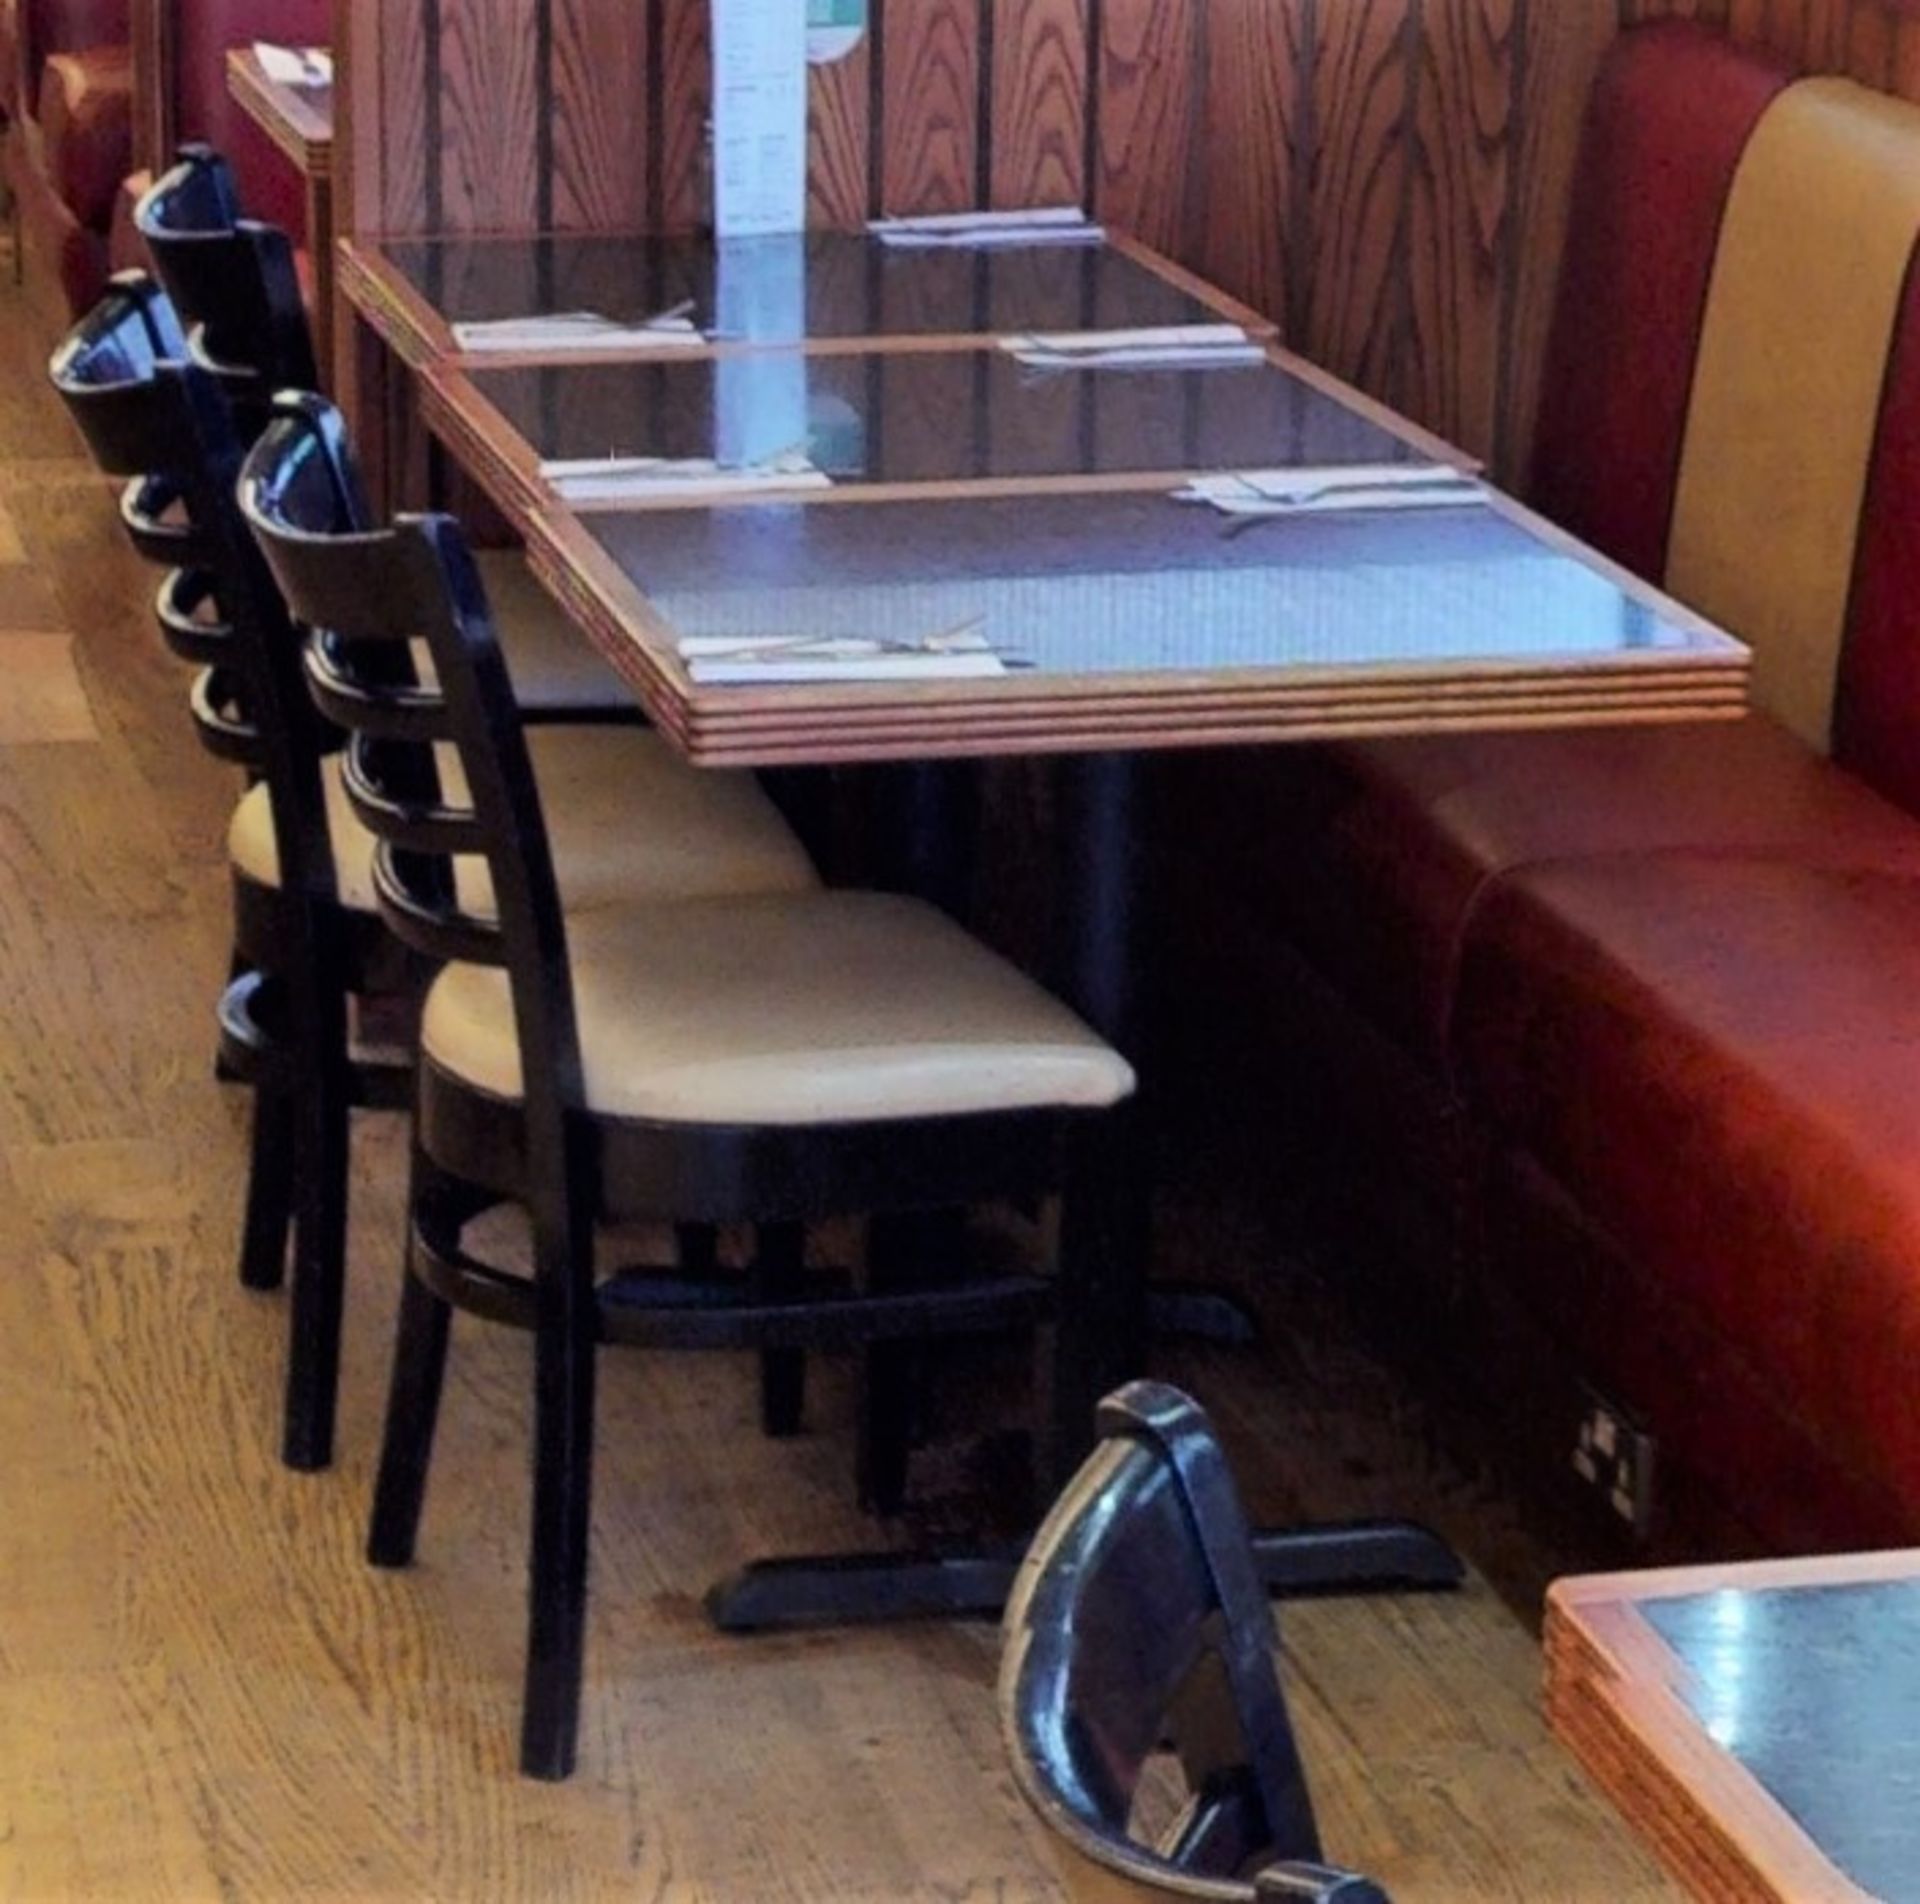 5 x Restaurant Tables With Granite Style Surface, Wooden Edging, Cast Iron Bases - Seats 2 Persons - Image 4 of 4